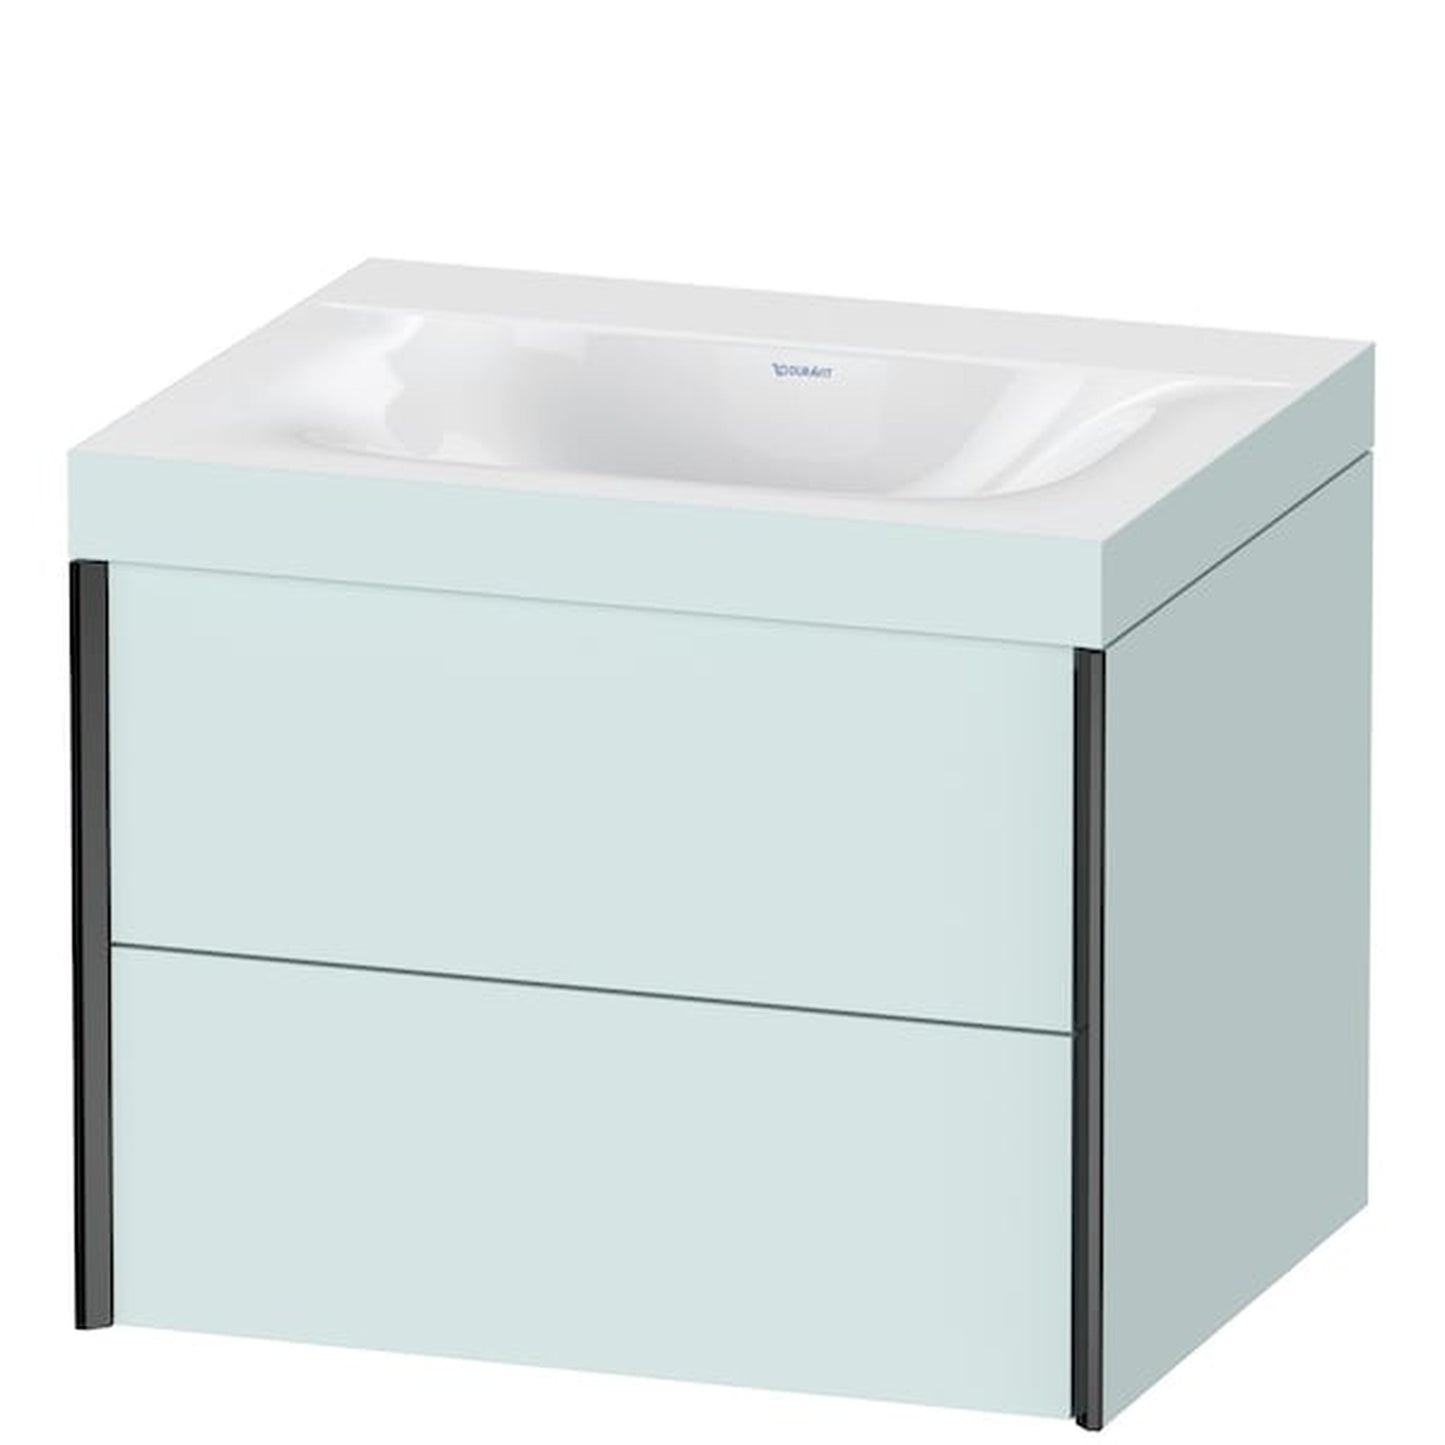 Duravit Xviu 24" x 20" x 19" Two Drawer C-Bonded Wall-Mount Vanity Kit Without Tap Hole, Light Blue (XV4614NB209C)